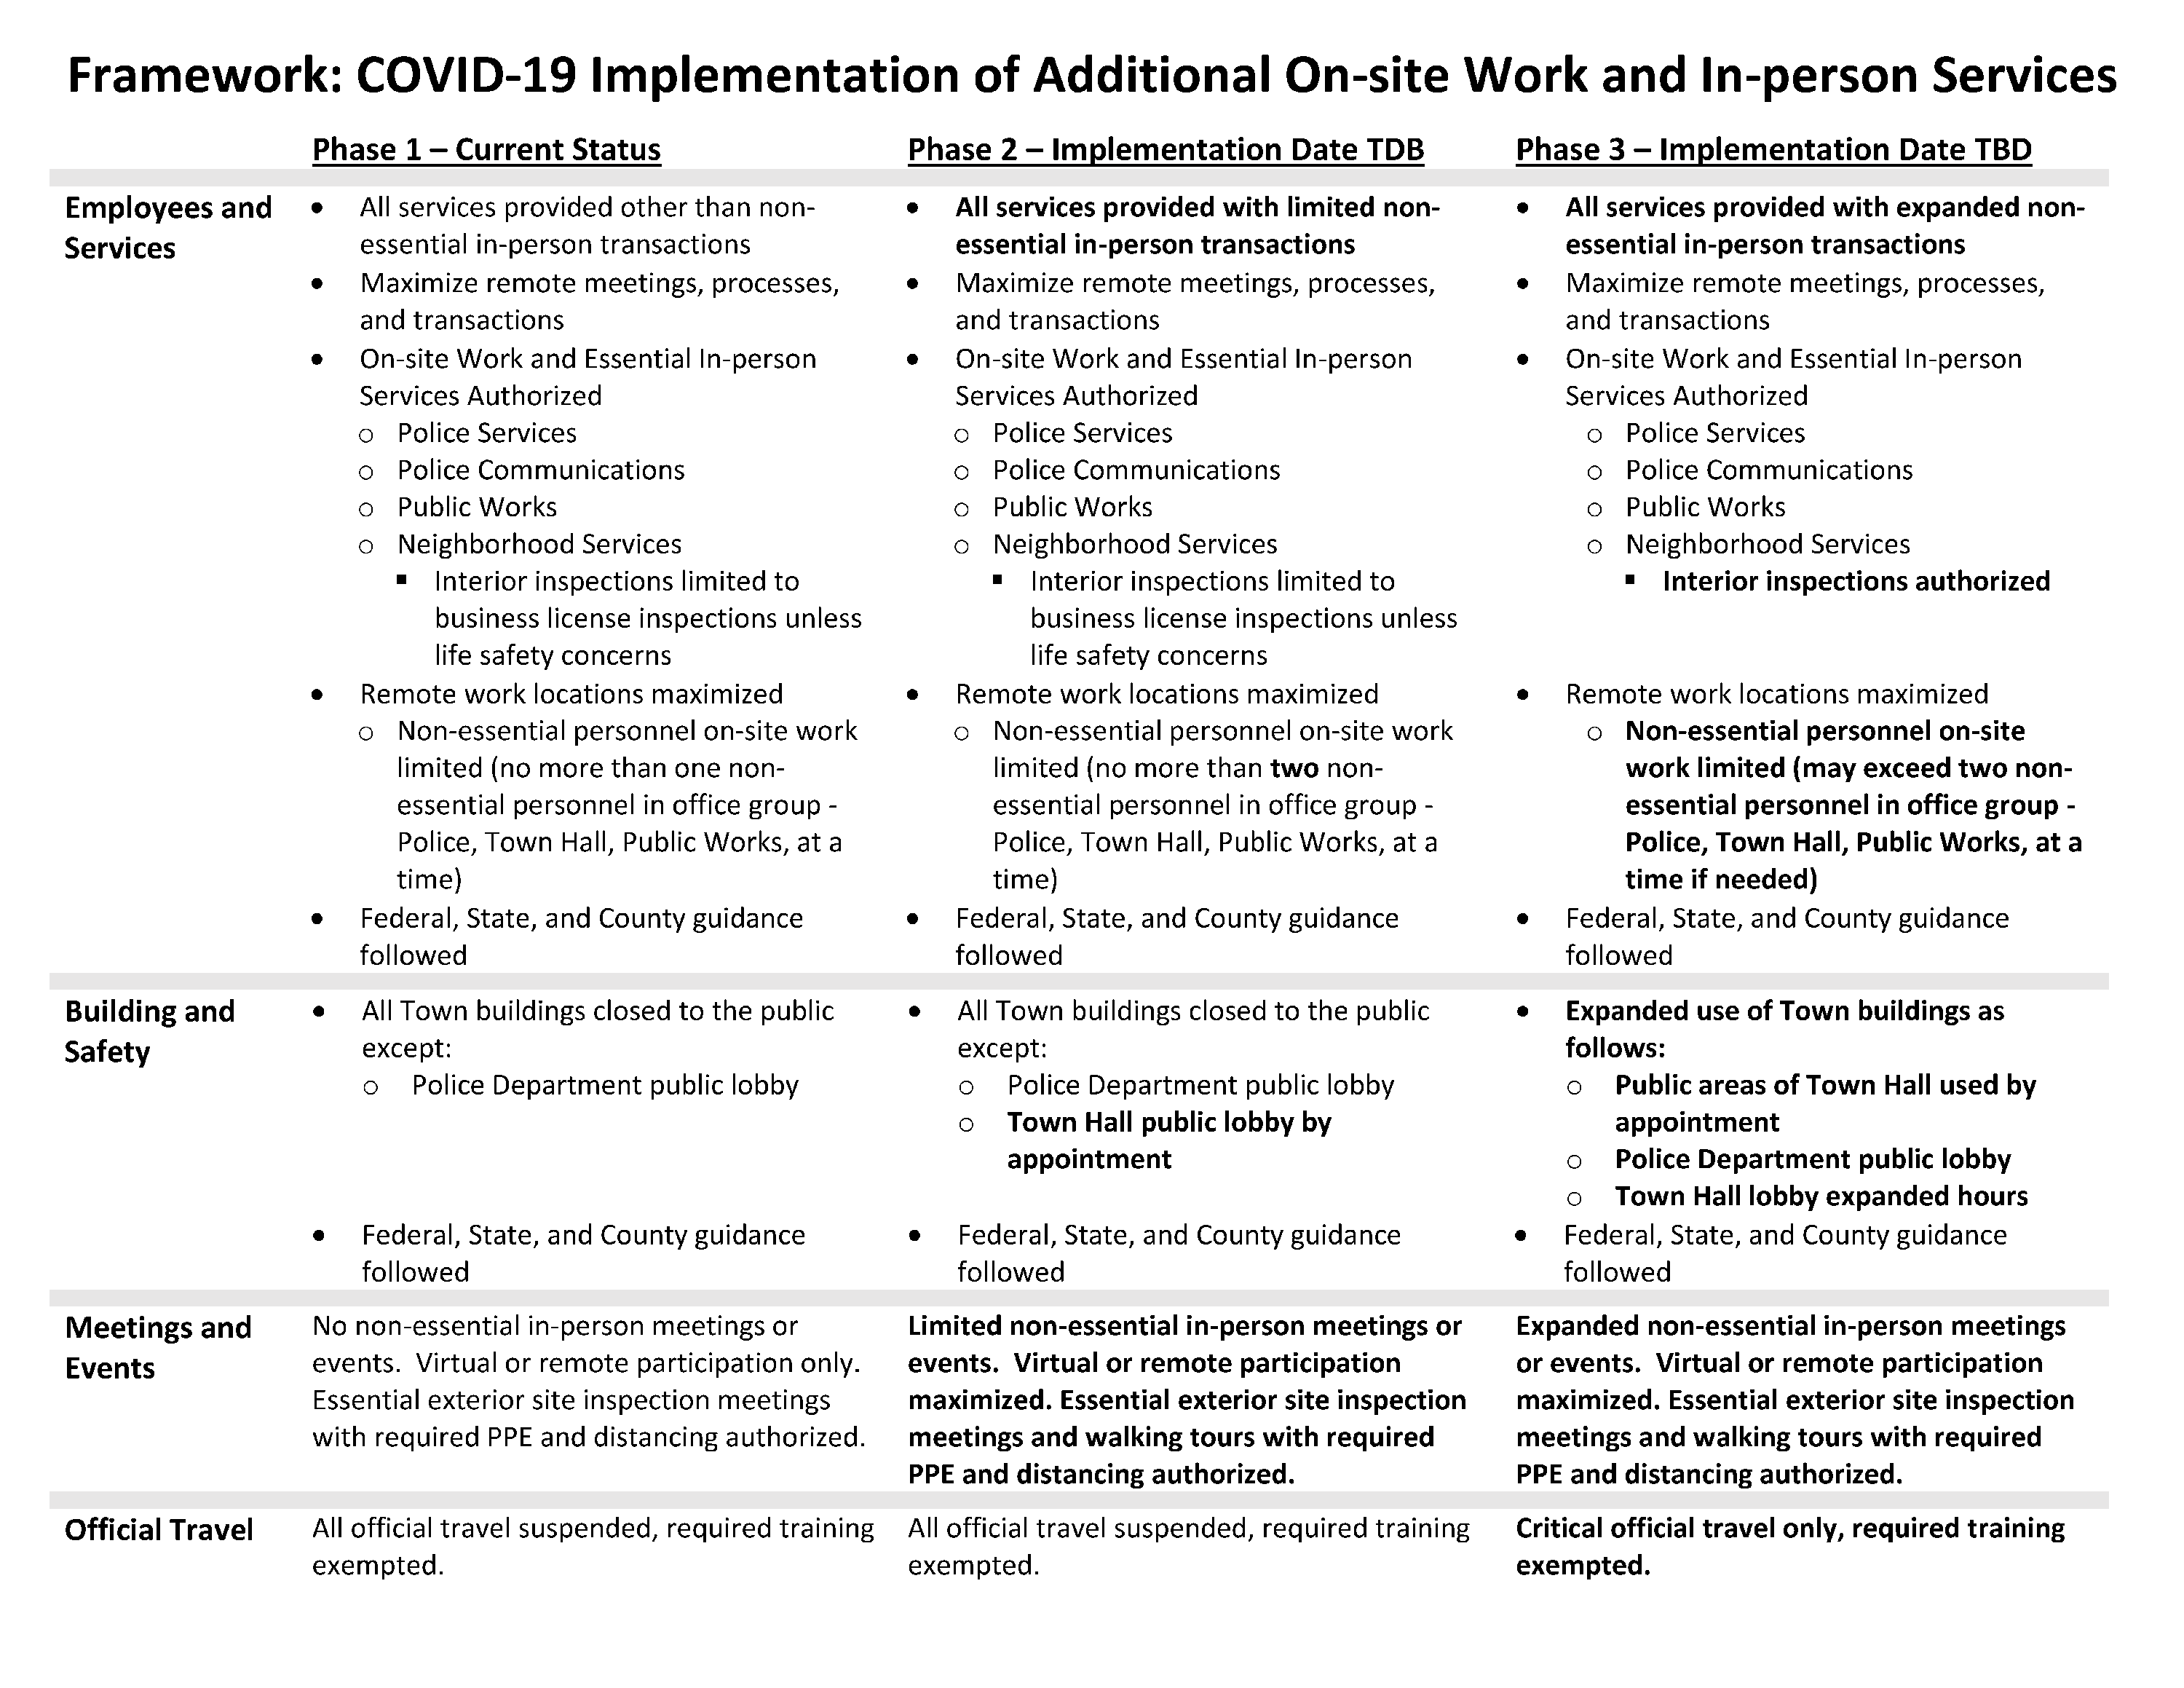 Framework for Additional Onsite Work and In-Person Services 082520